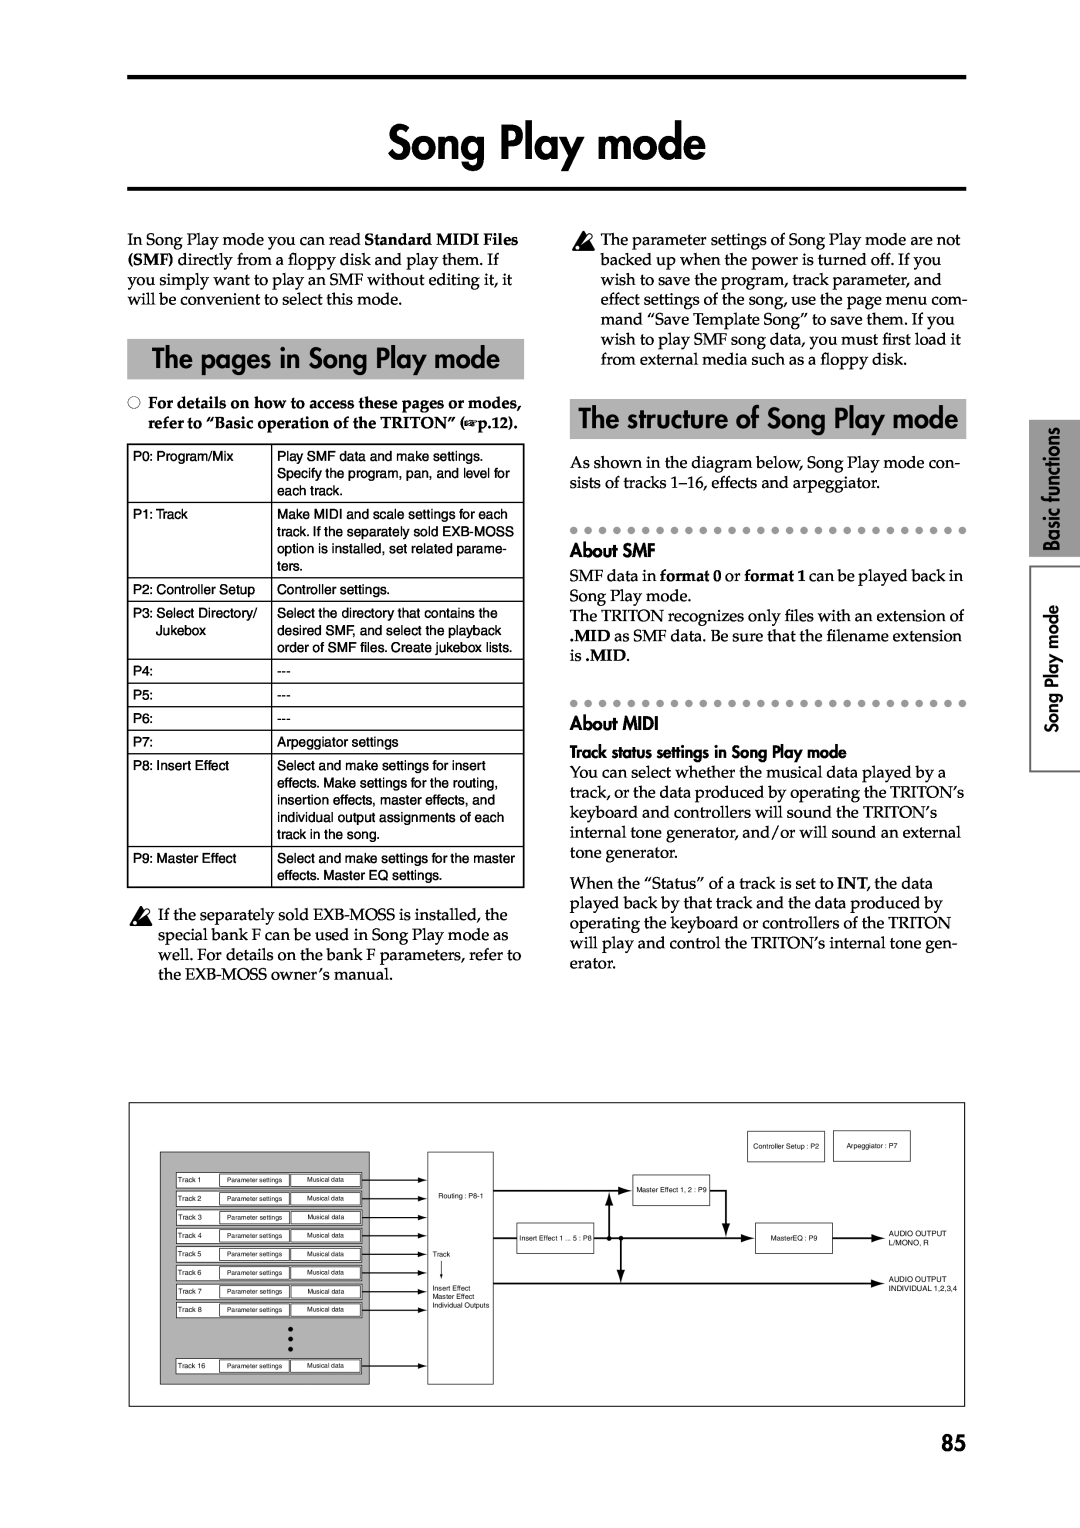 Korg Speaker System owner manual The pages in Song Play mode, The structure of Song Play mode, About SMF, About MIDI 